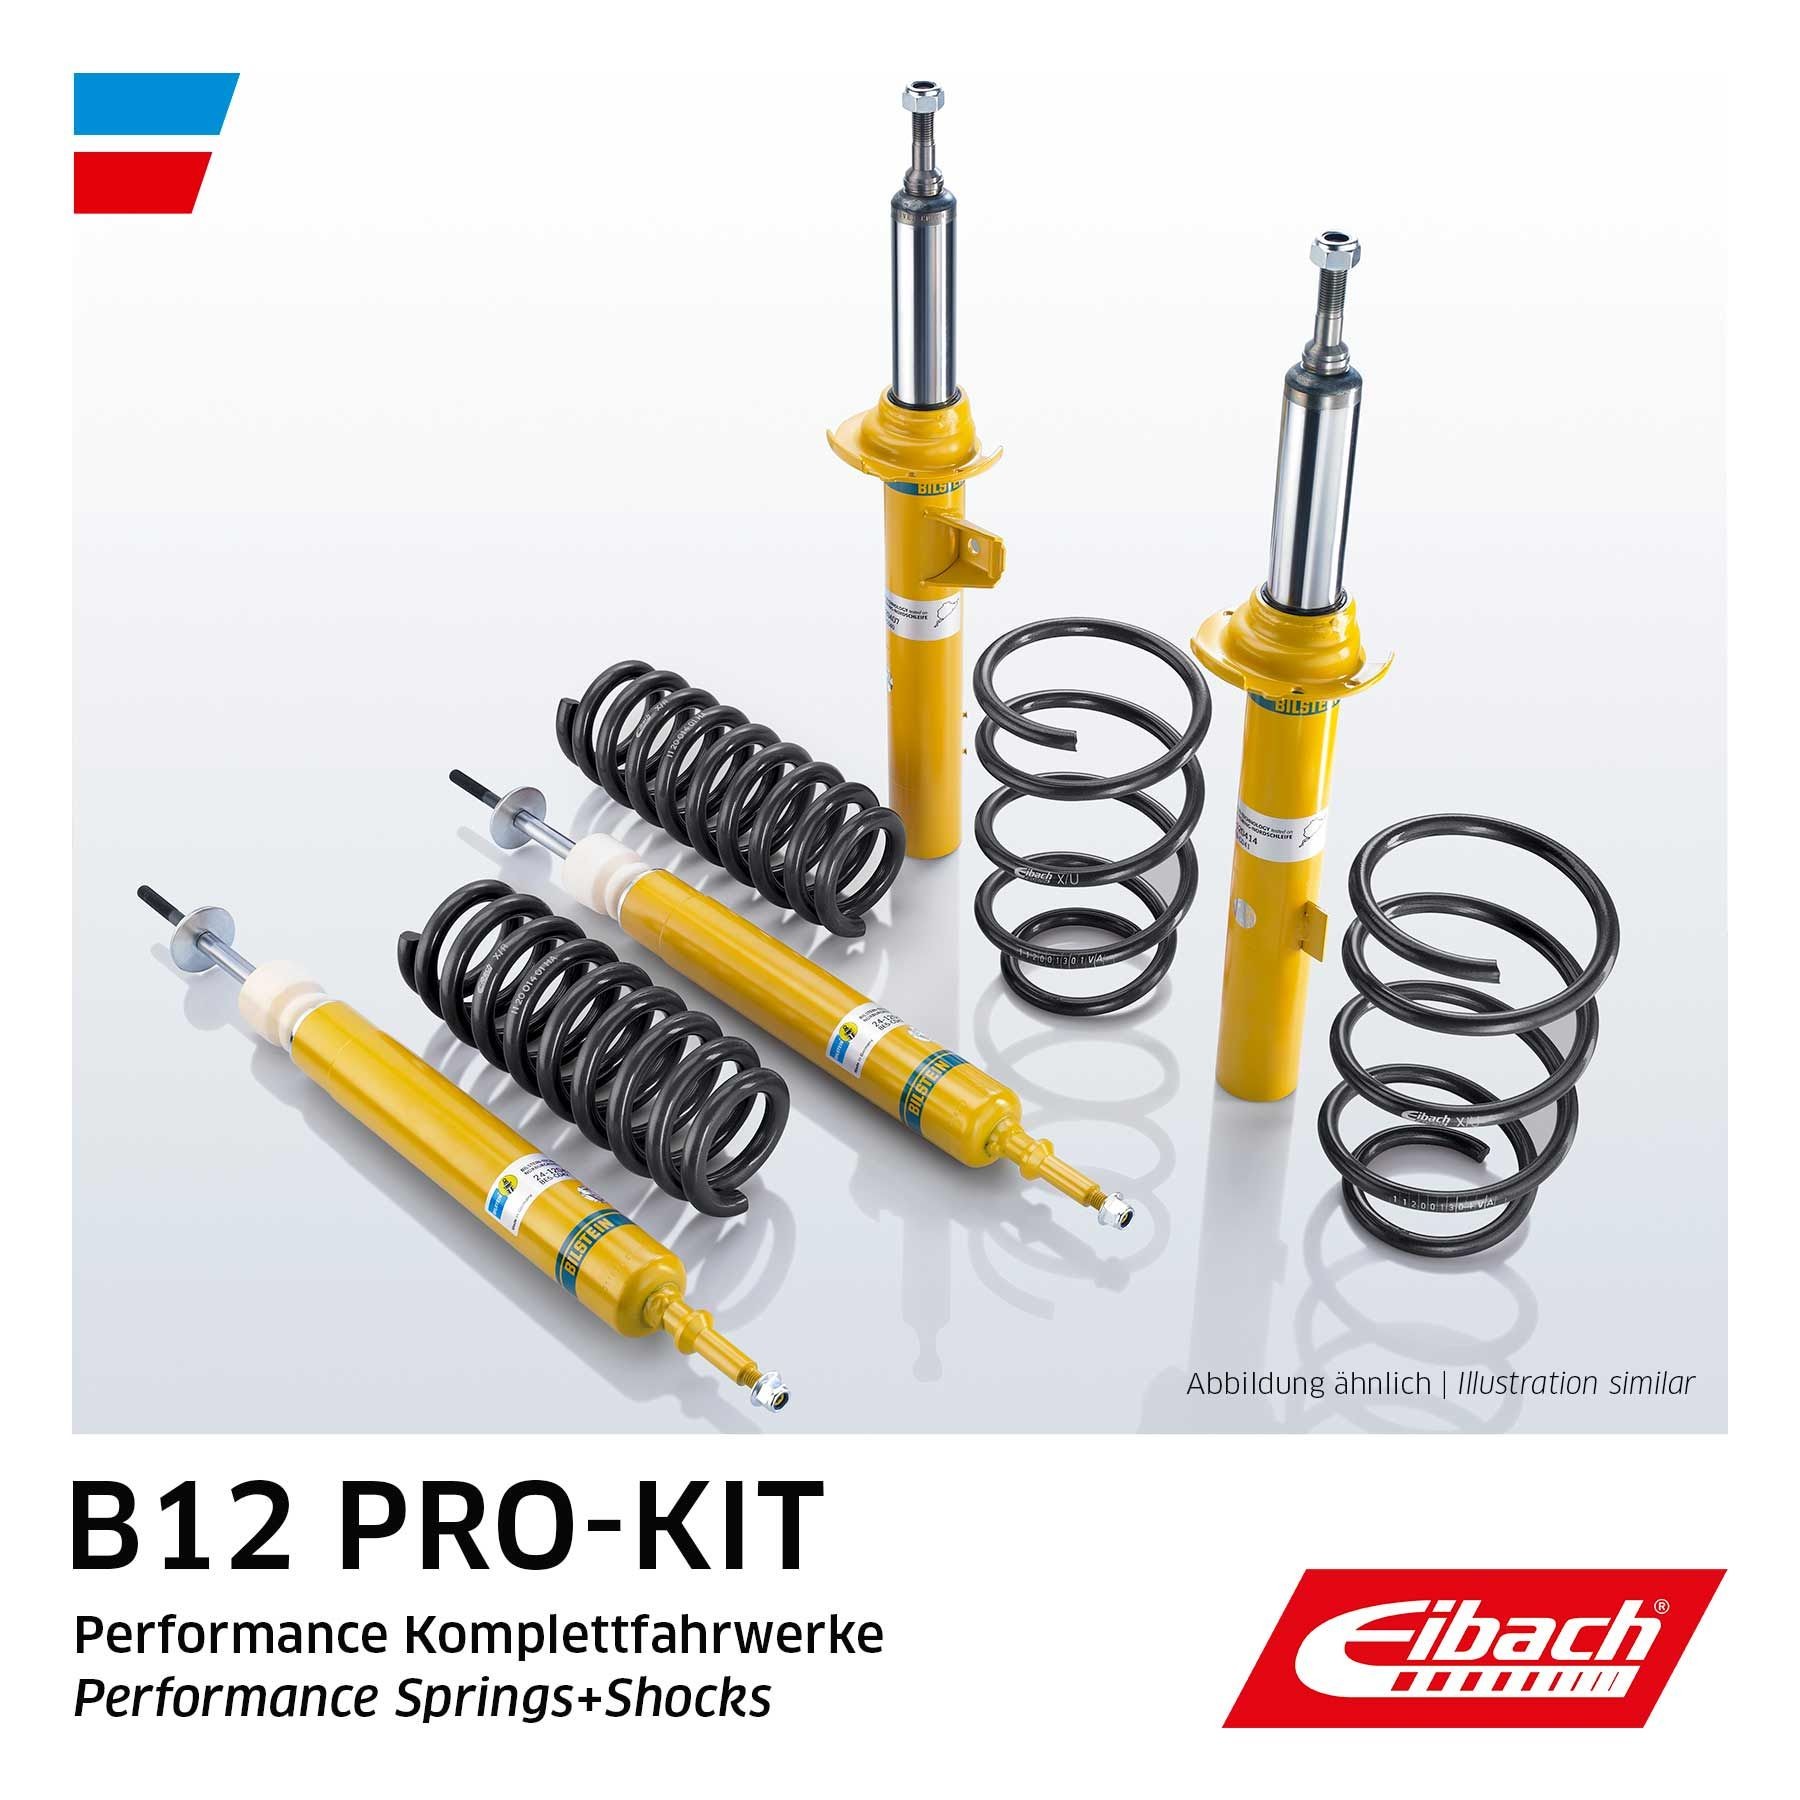 EIBACH E90-70-002-01-20 Suspension kit, coil springs / shock absorbers PEUGEOT 206 2006 price